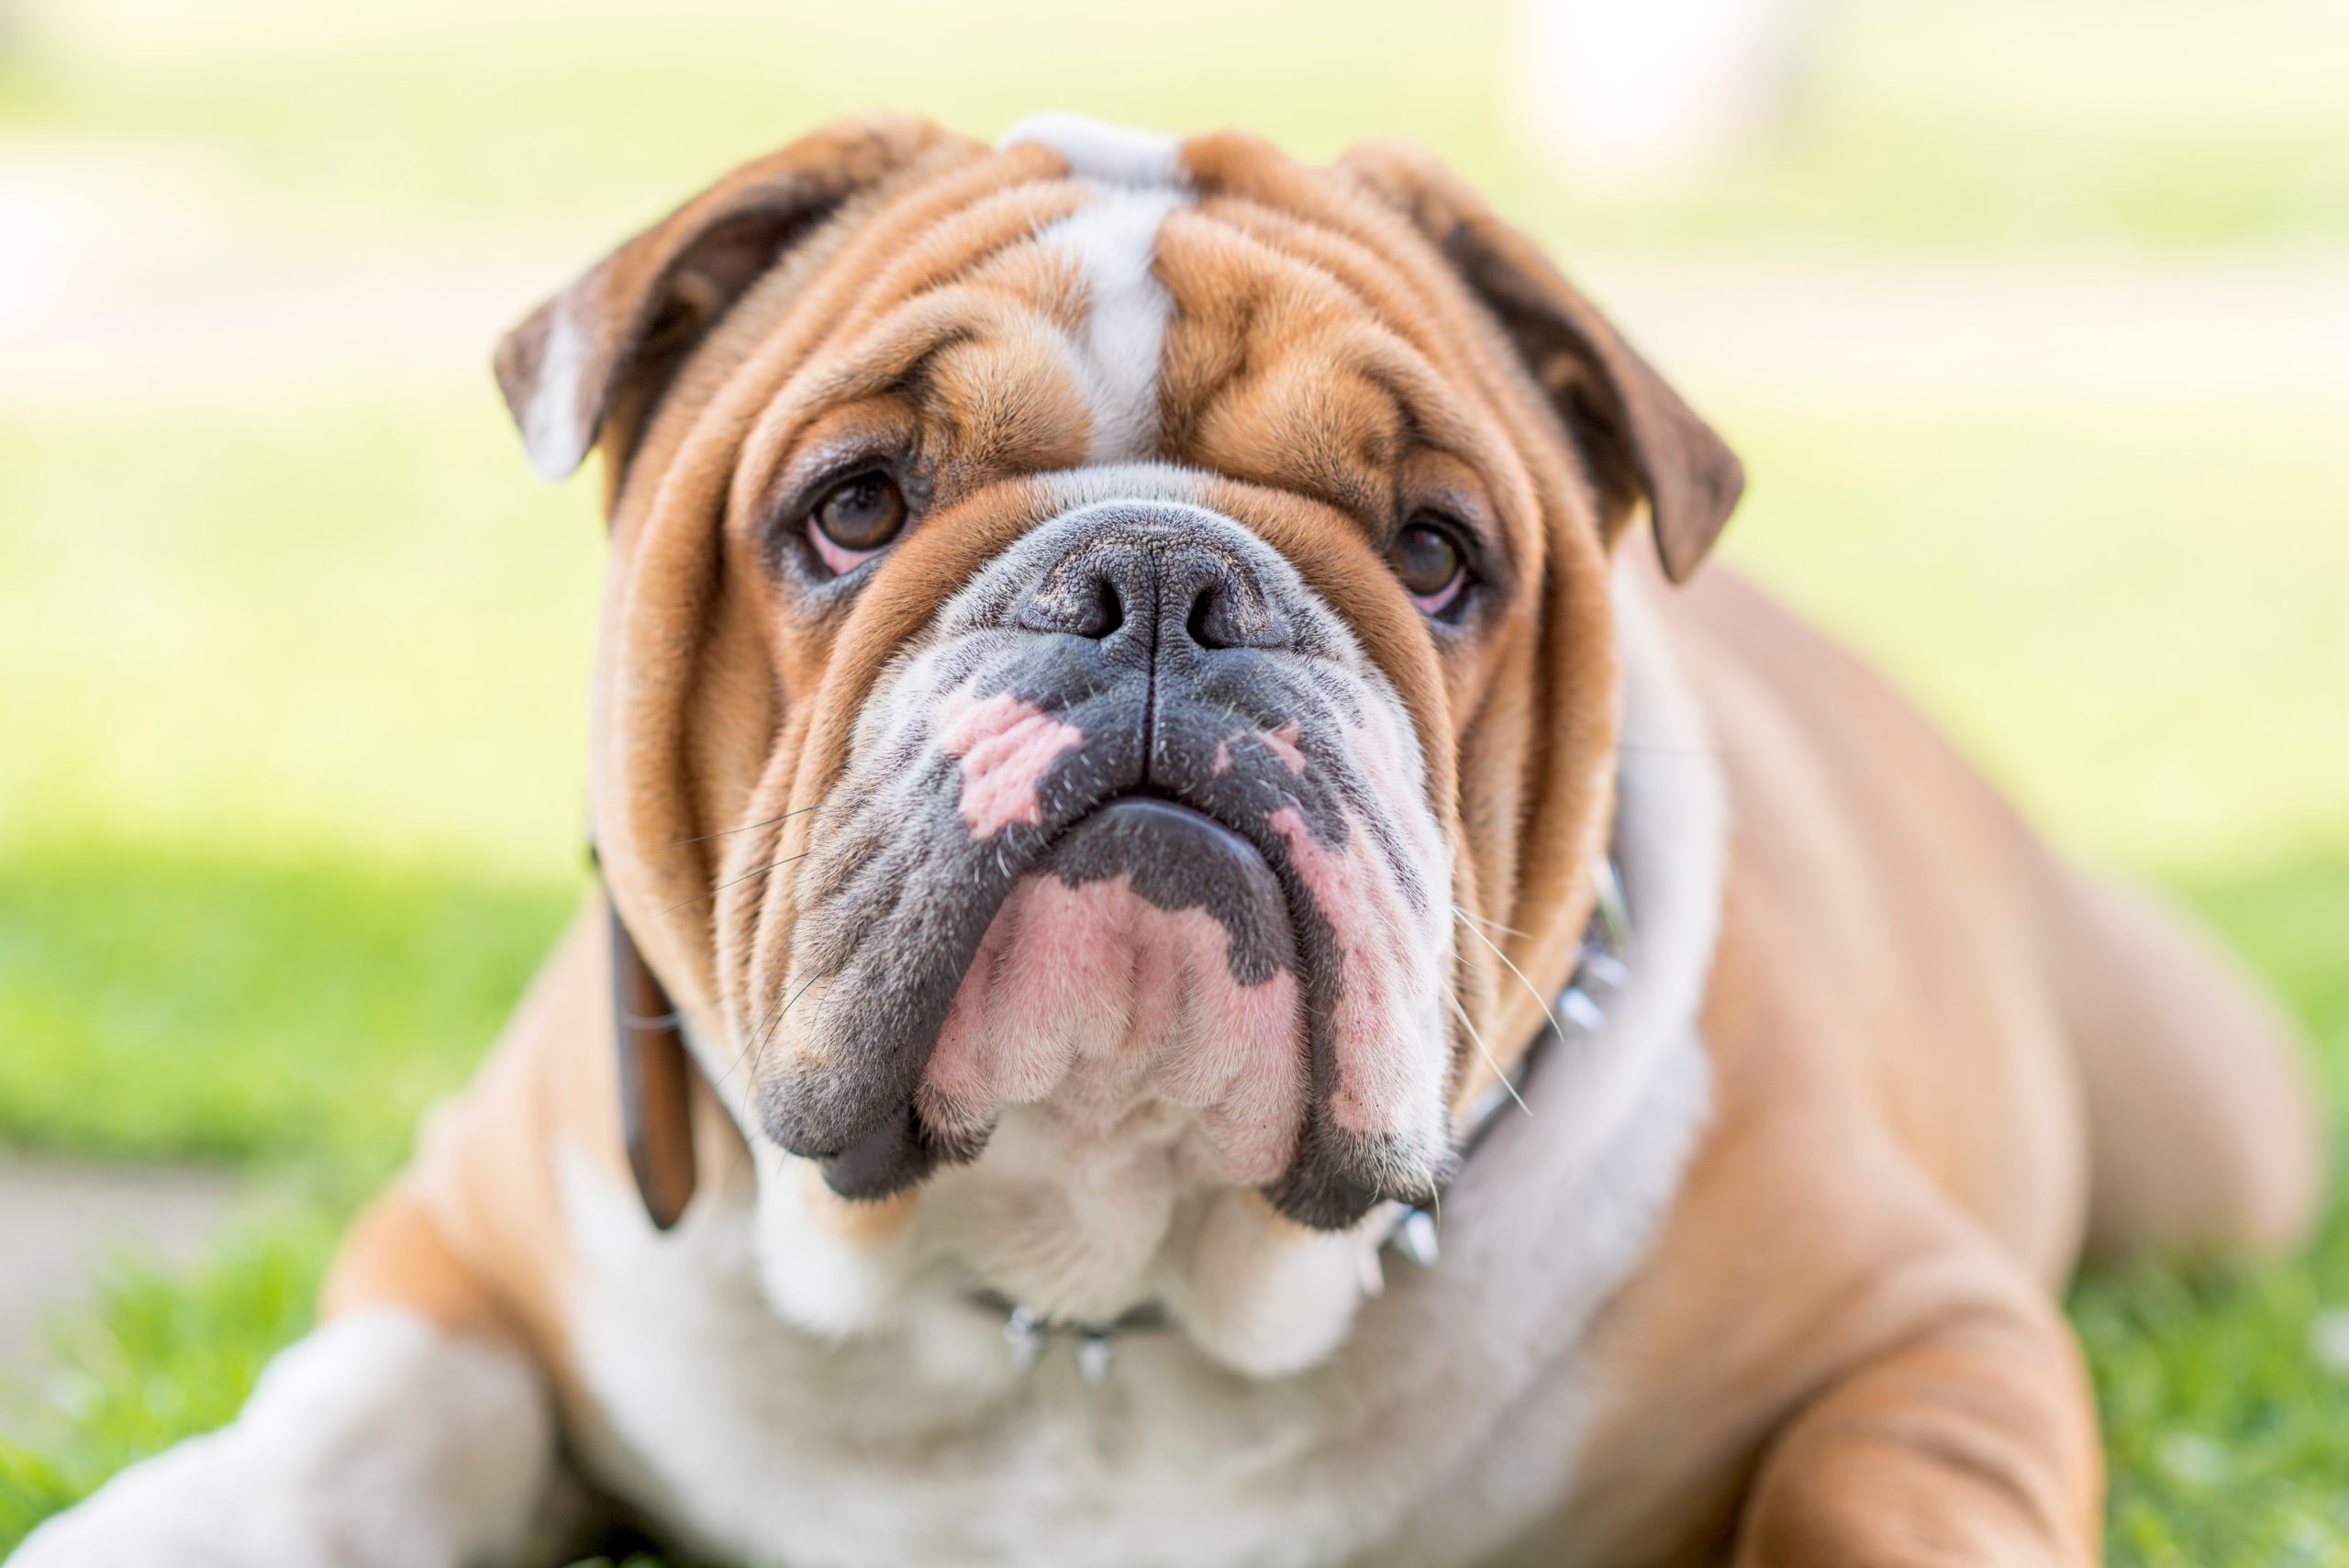 RVC urges people to stop buying English Bulldogs